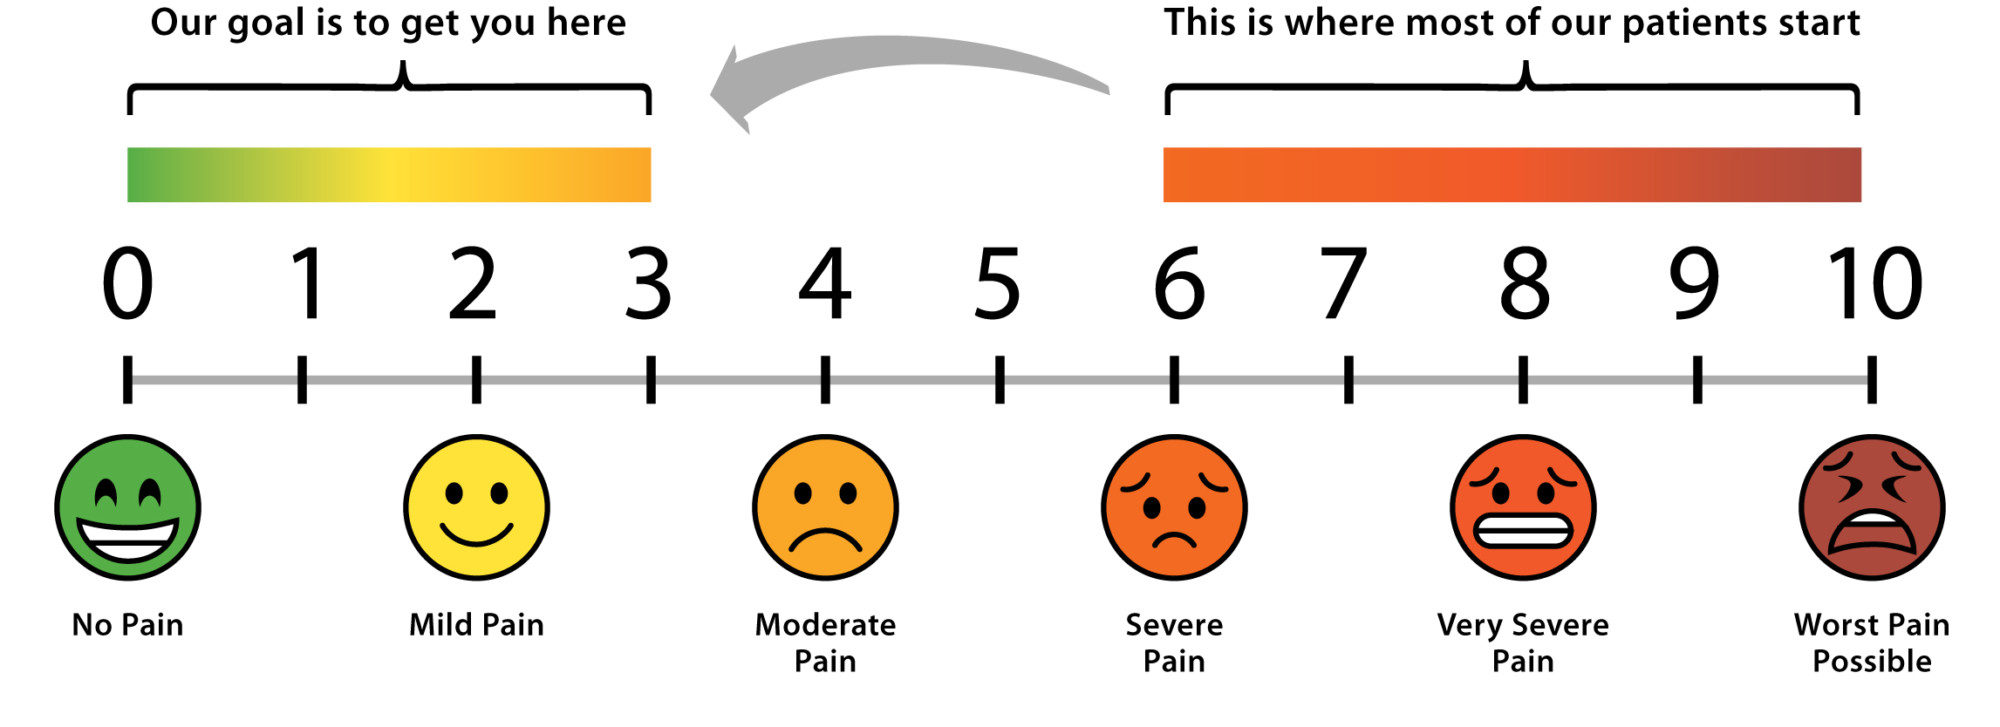 Our Goal is to get you to the first third of the pain chart